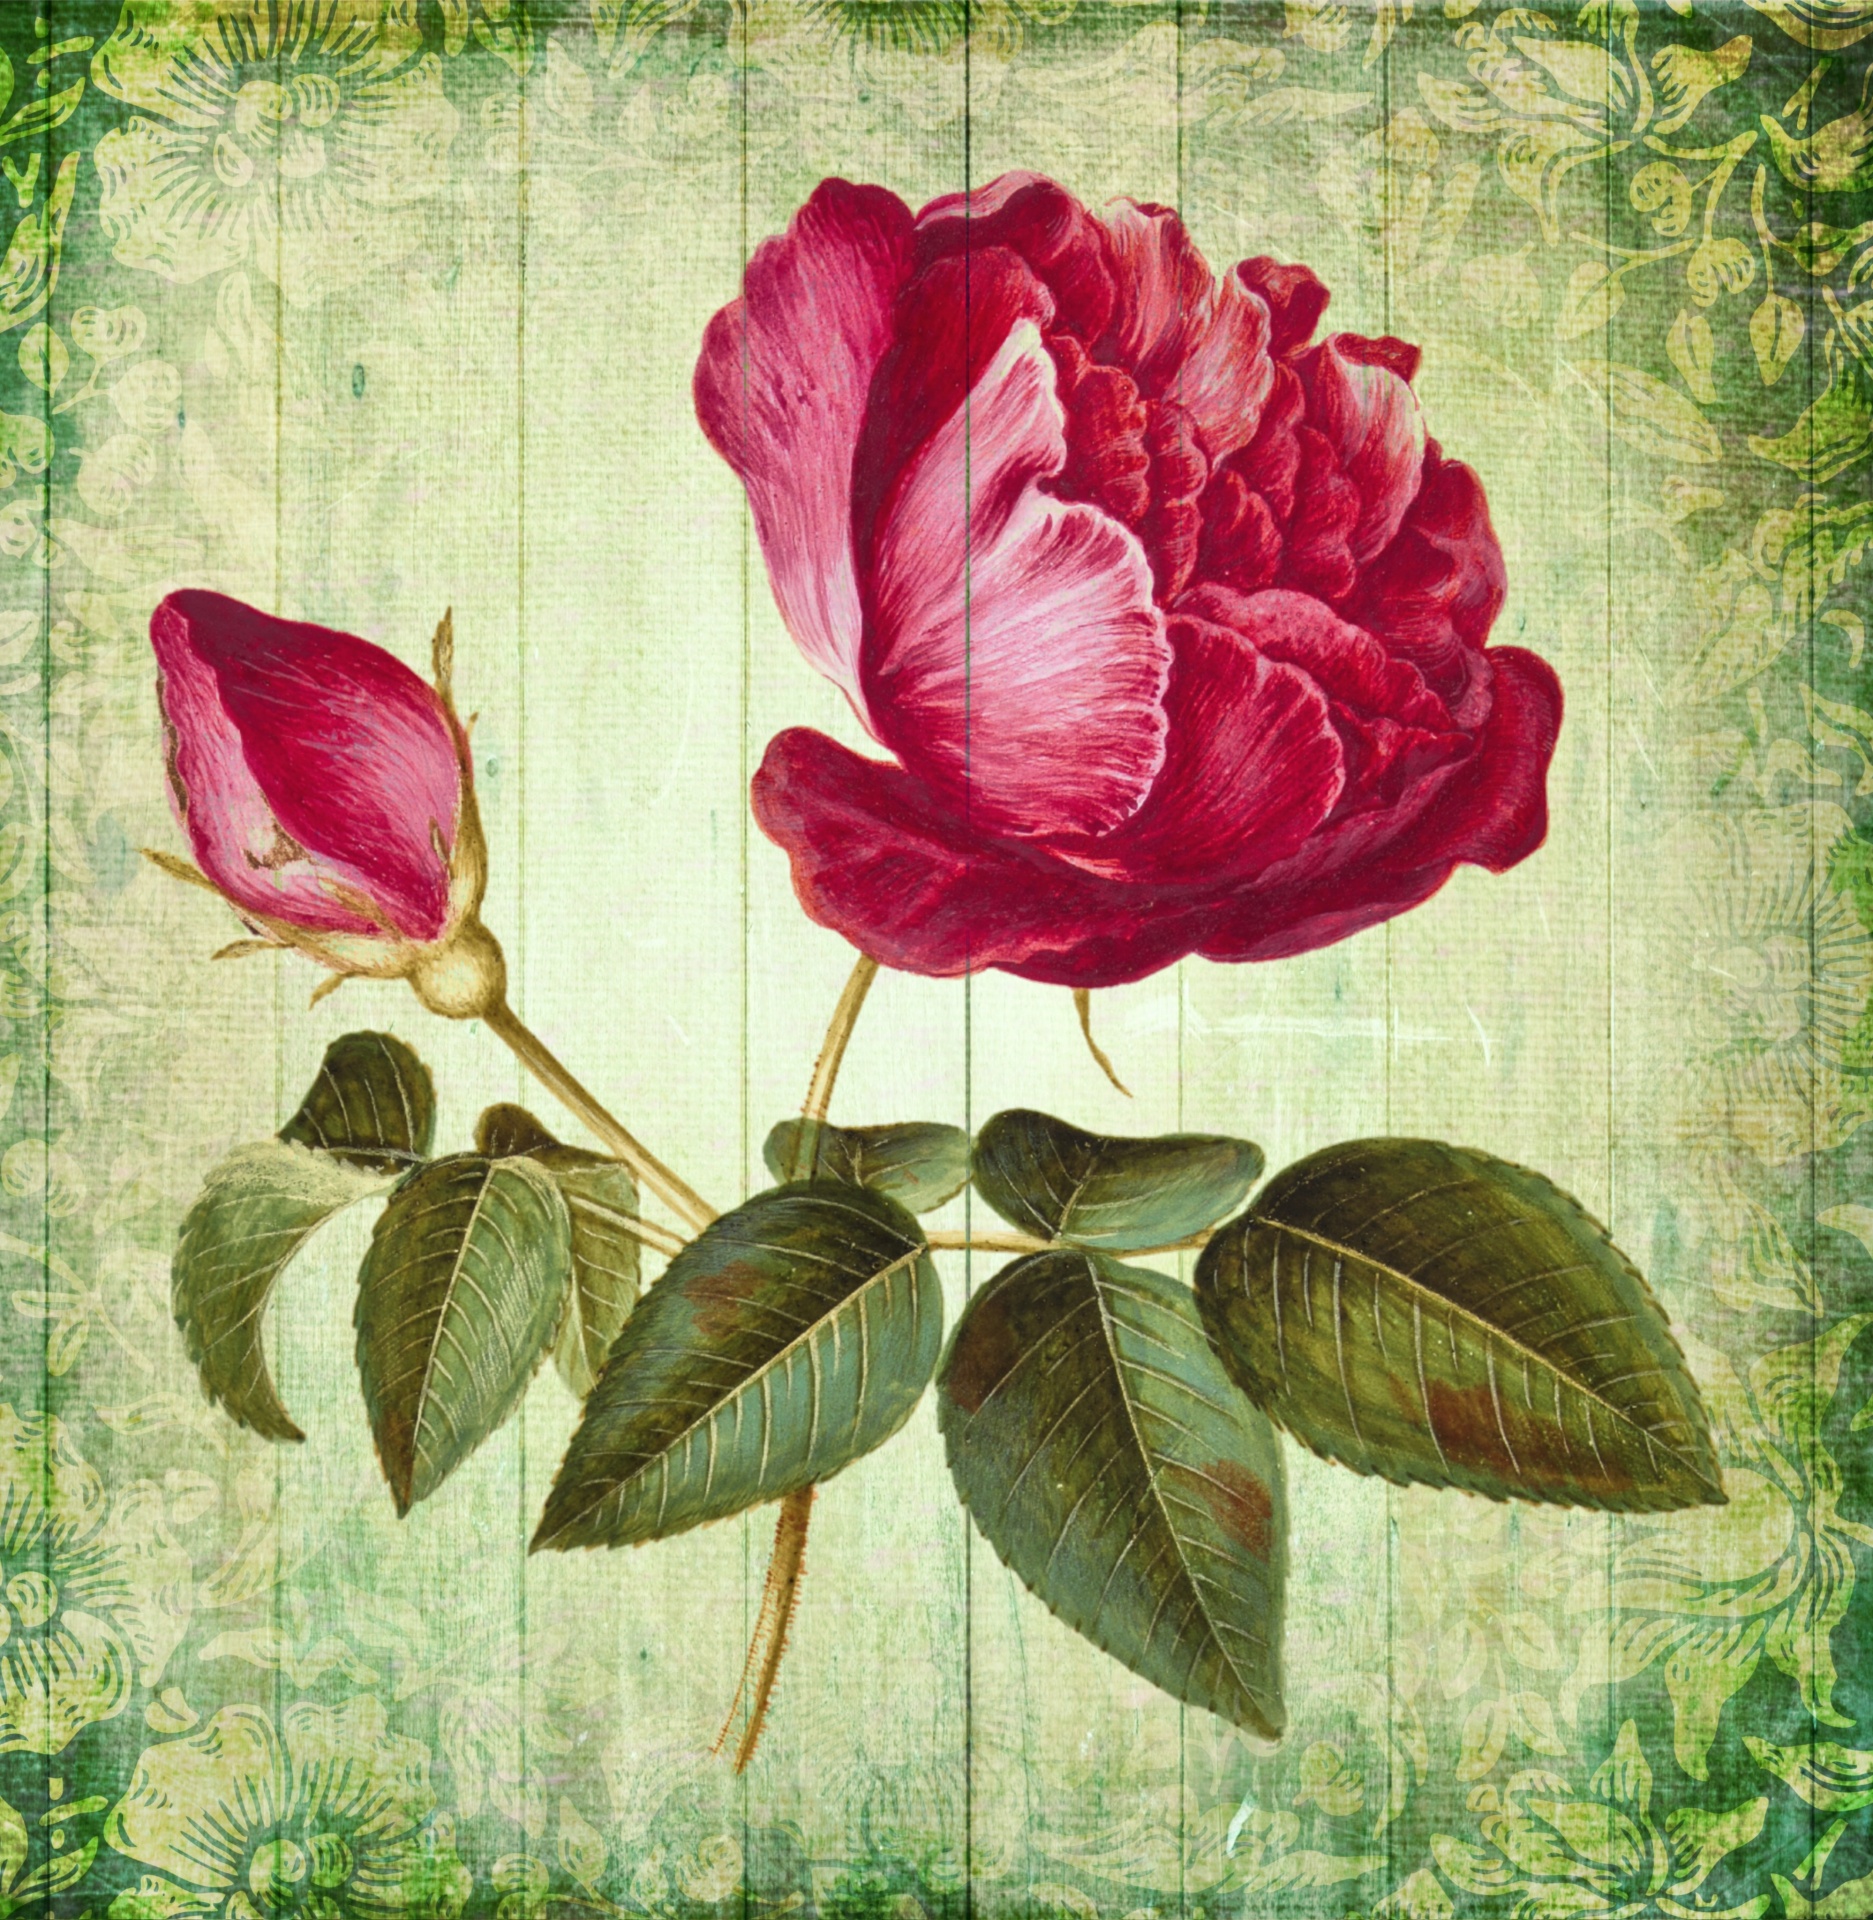 Vintage art collage work Rose flower on green canvas with wood planks texture